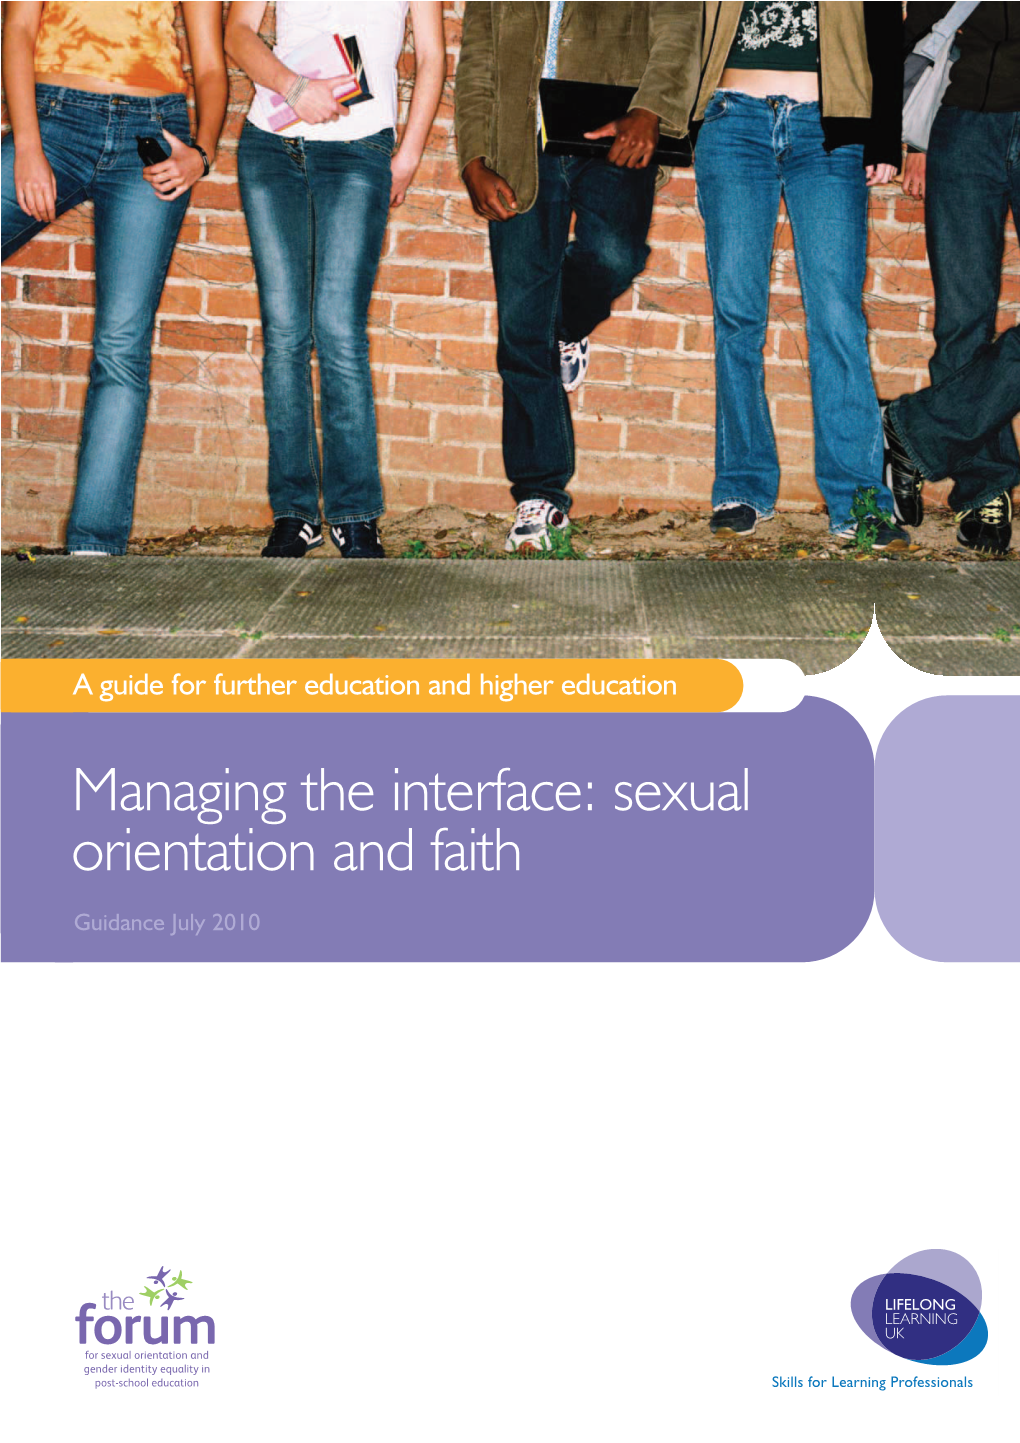 Managing the Interface: Sexual Orientation and Faith